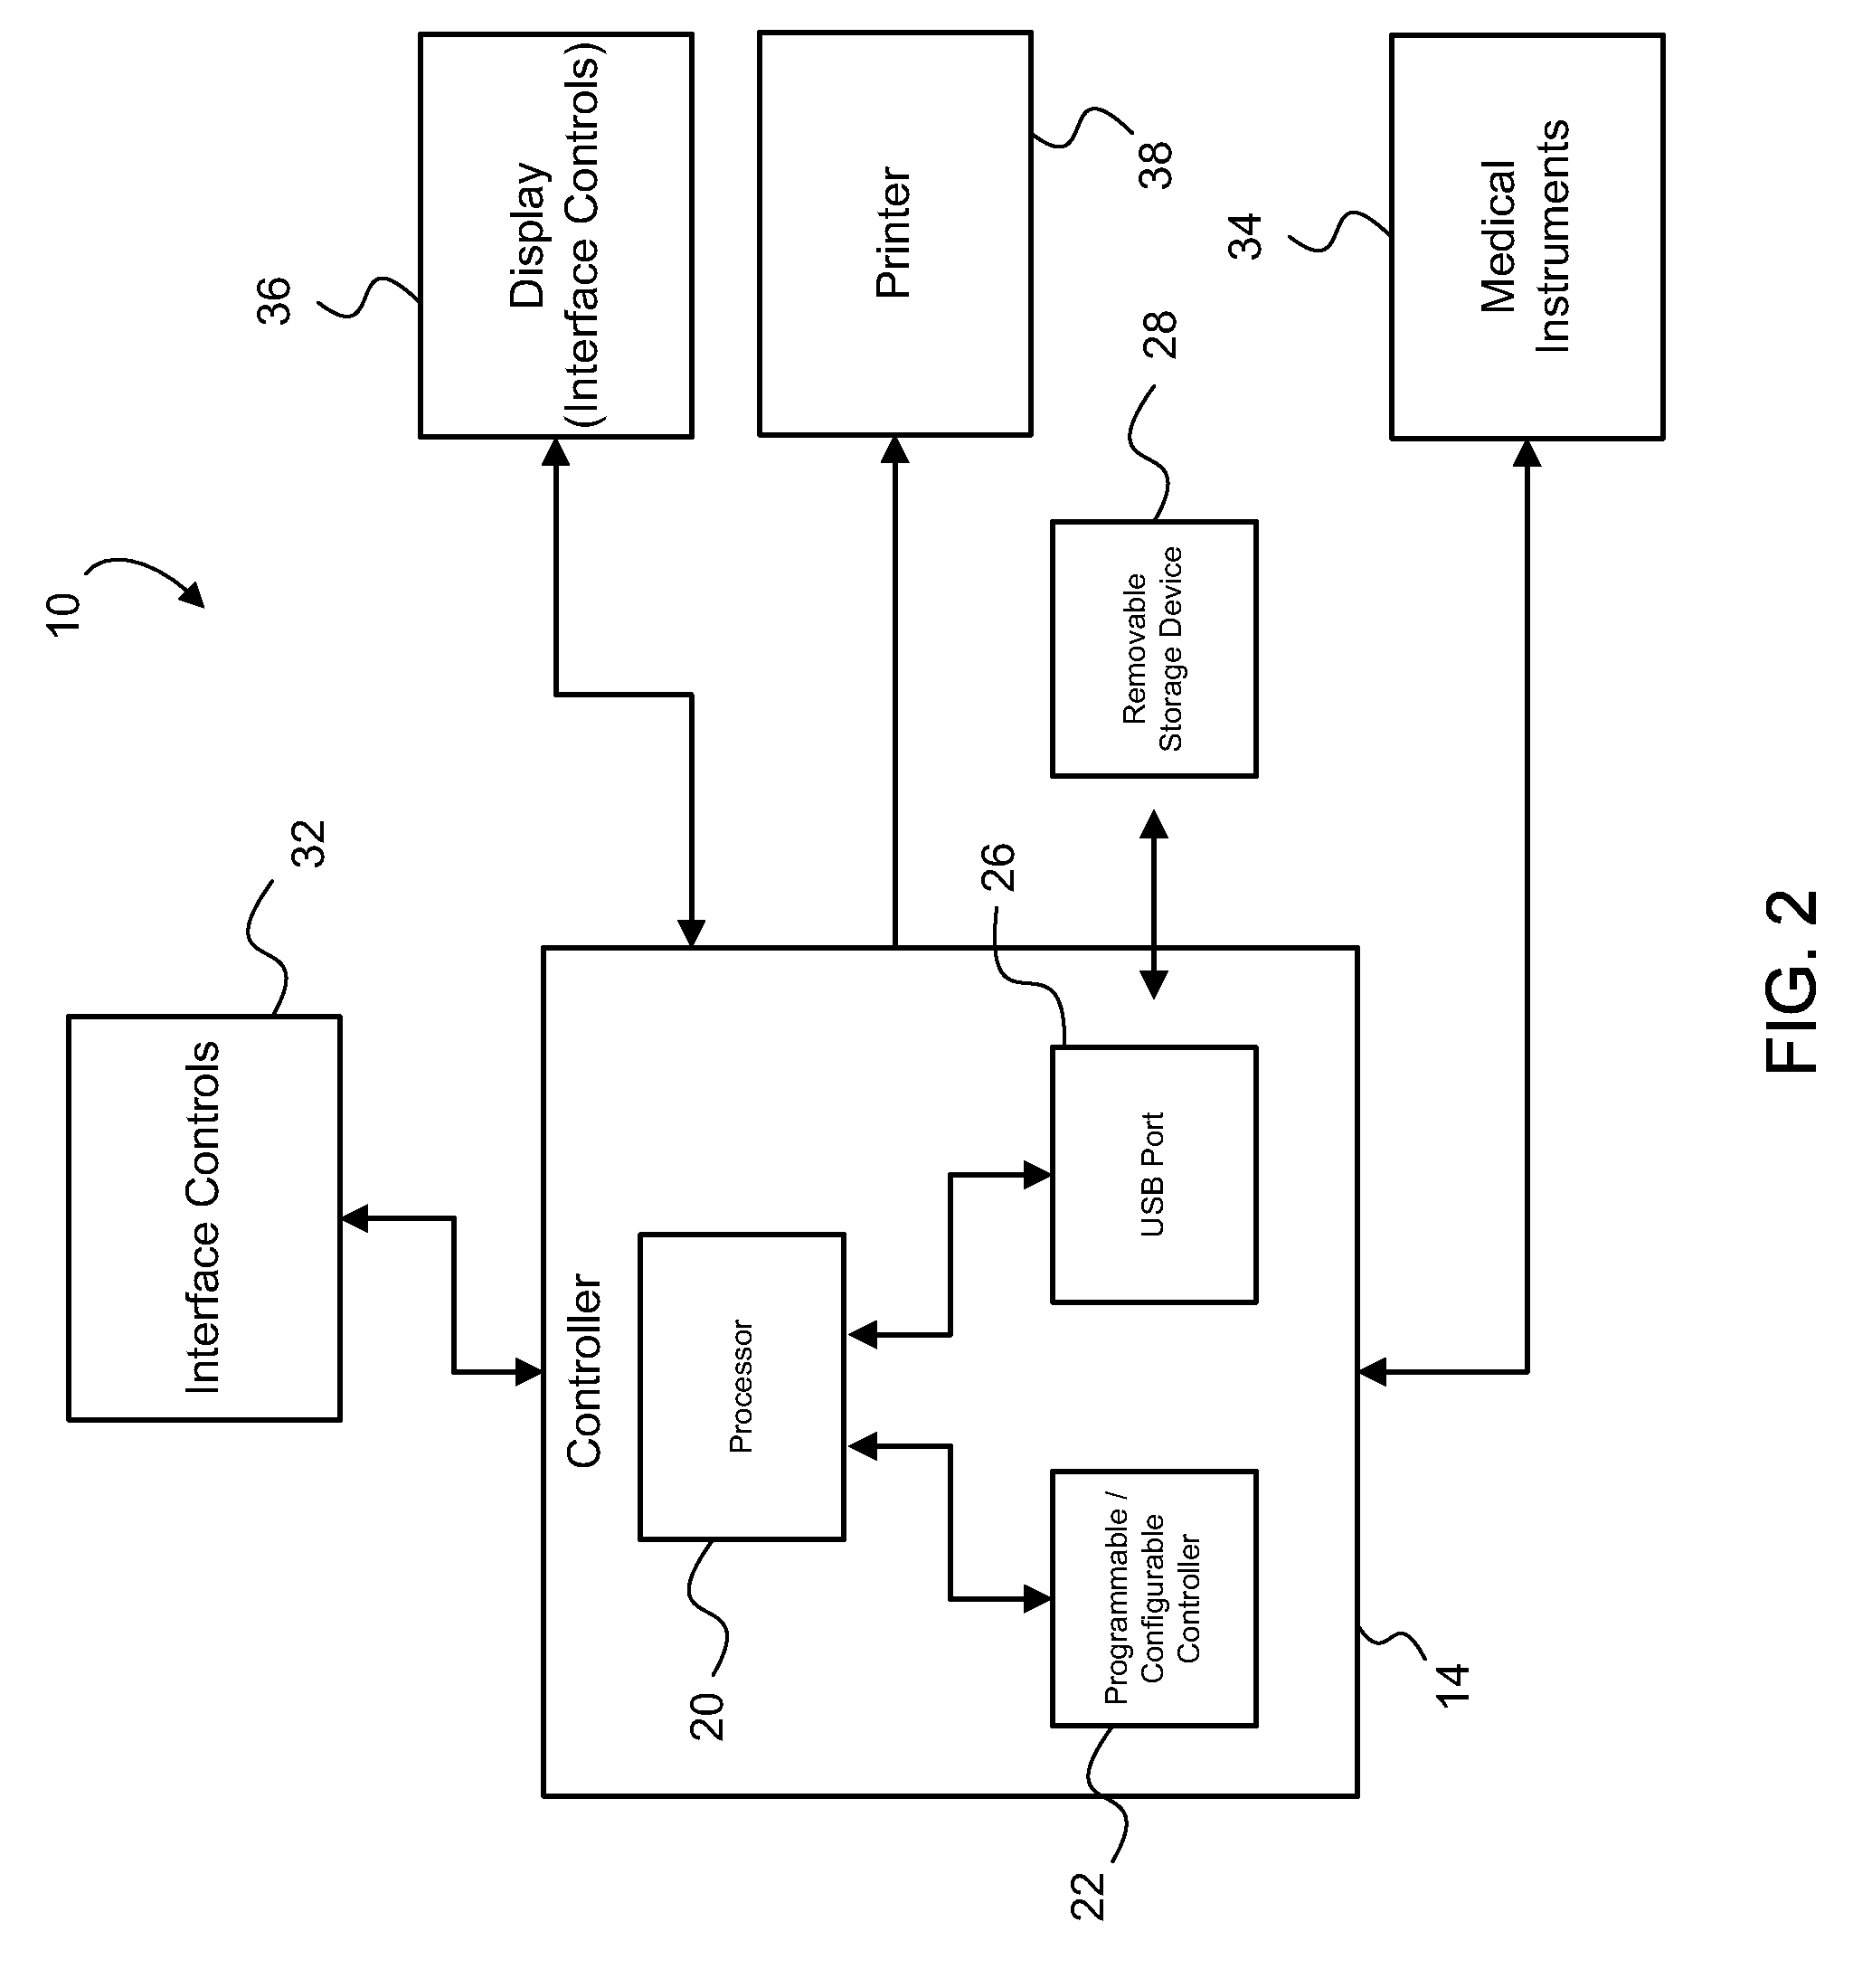 Video imaging system with a camera control unit